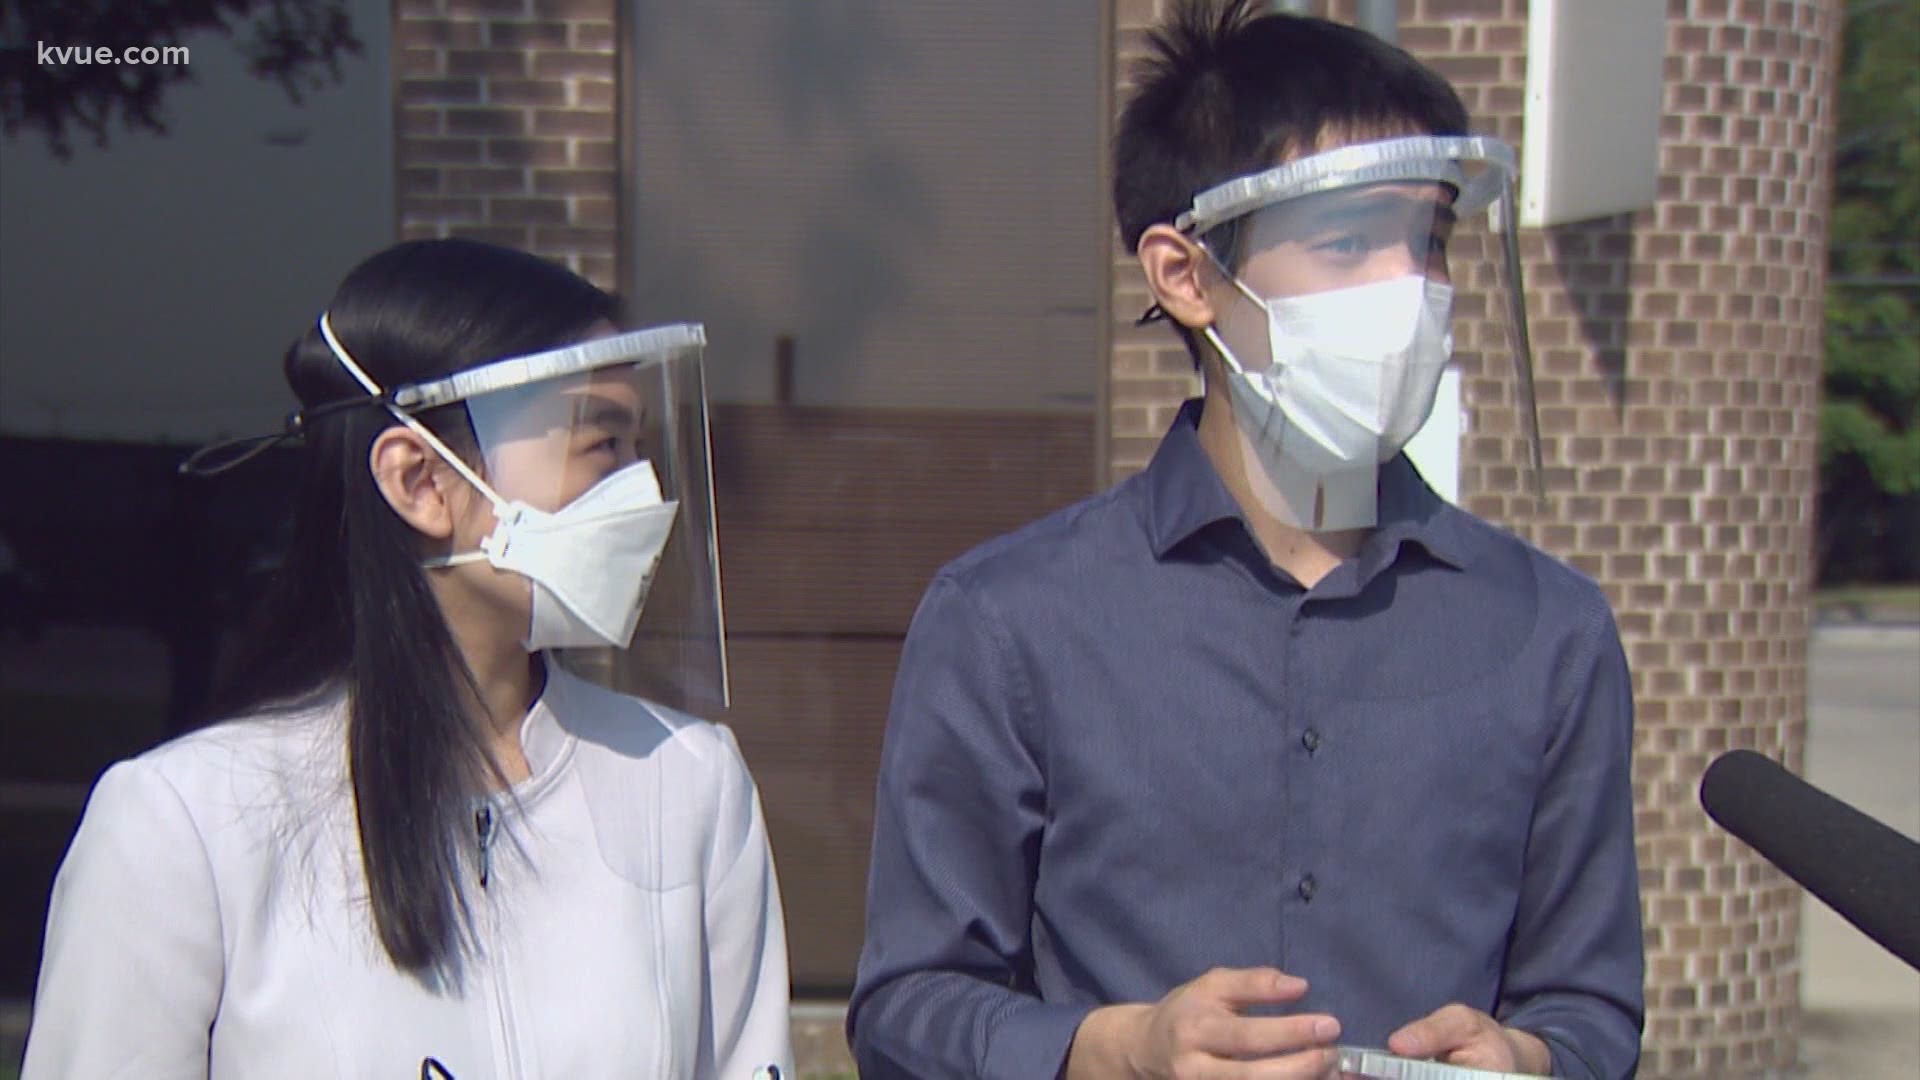 Two Westlake High School students and siblings are making face shields for essential workers. Kevin and Katelyn Yu designed and built the shields.